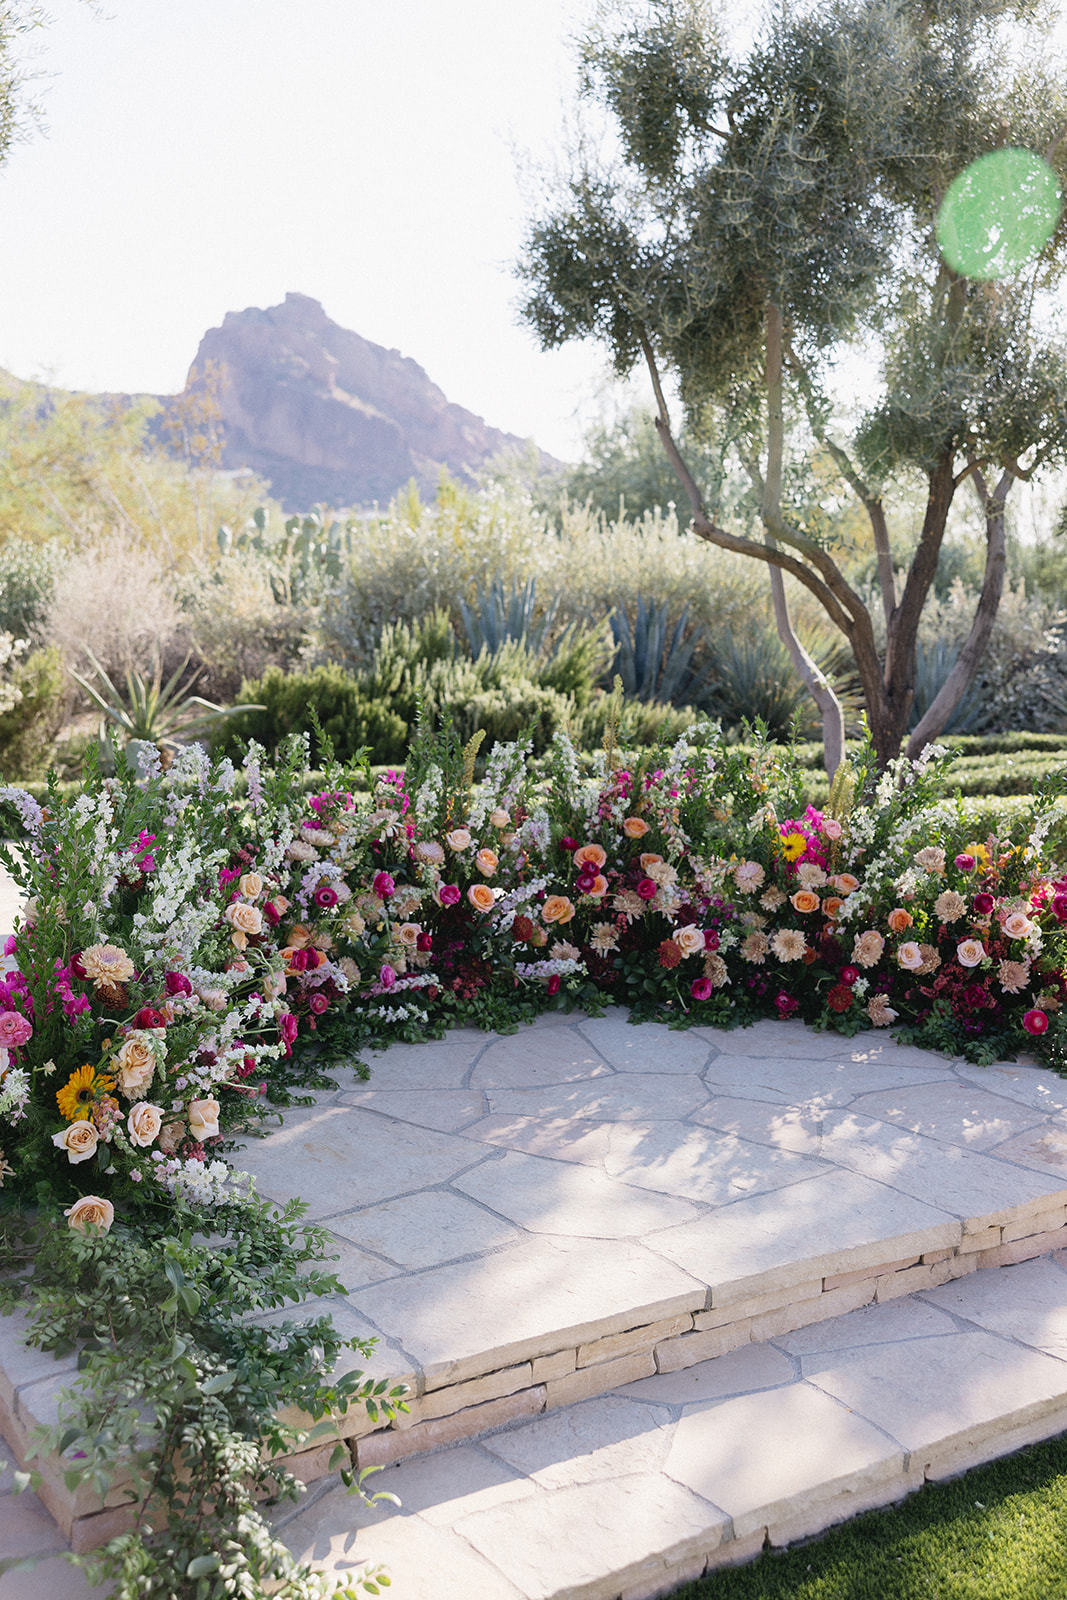 Wedding ceremony ground arc in altar space of colorful pink, peach flowers and greenery at El Chorro.